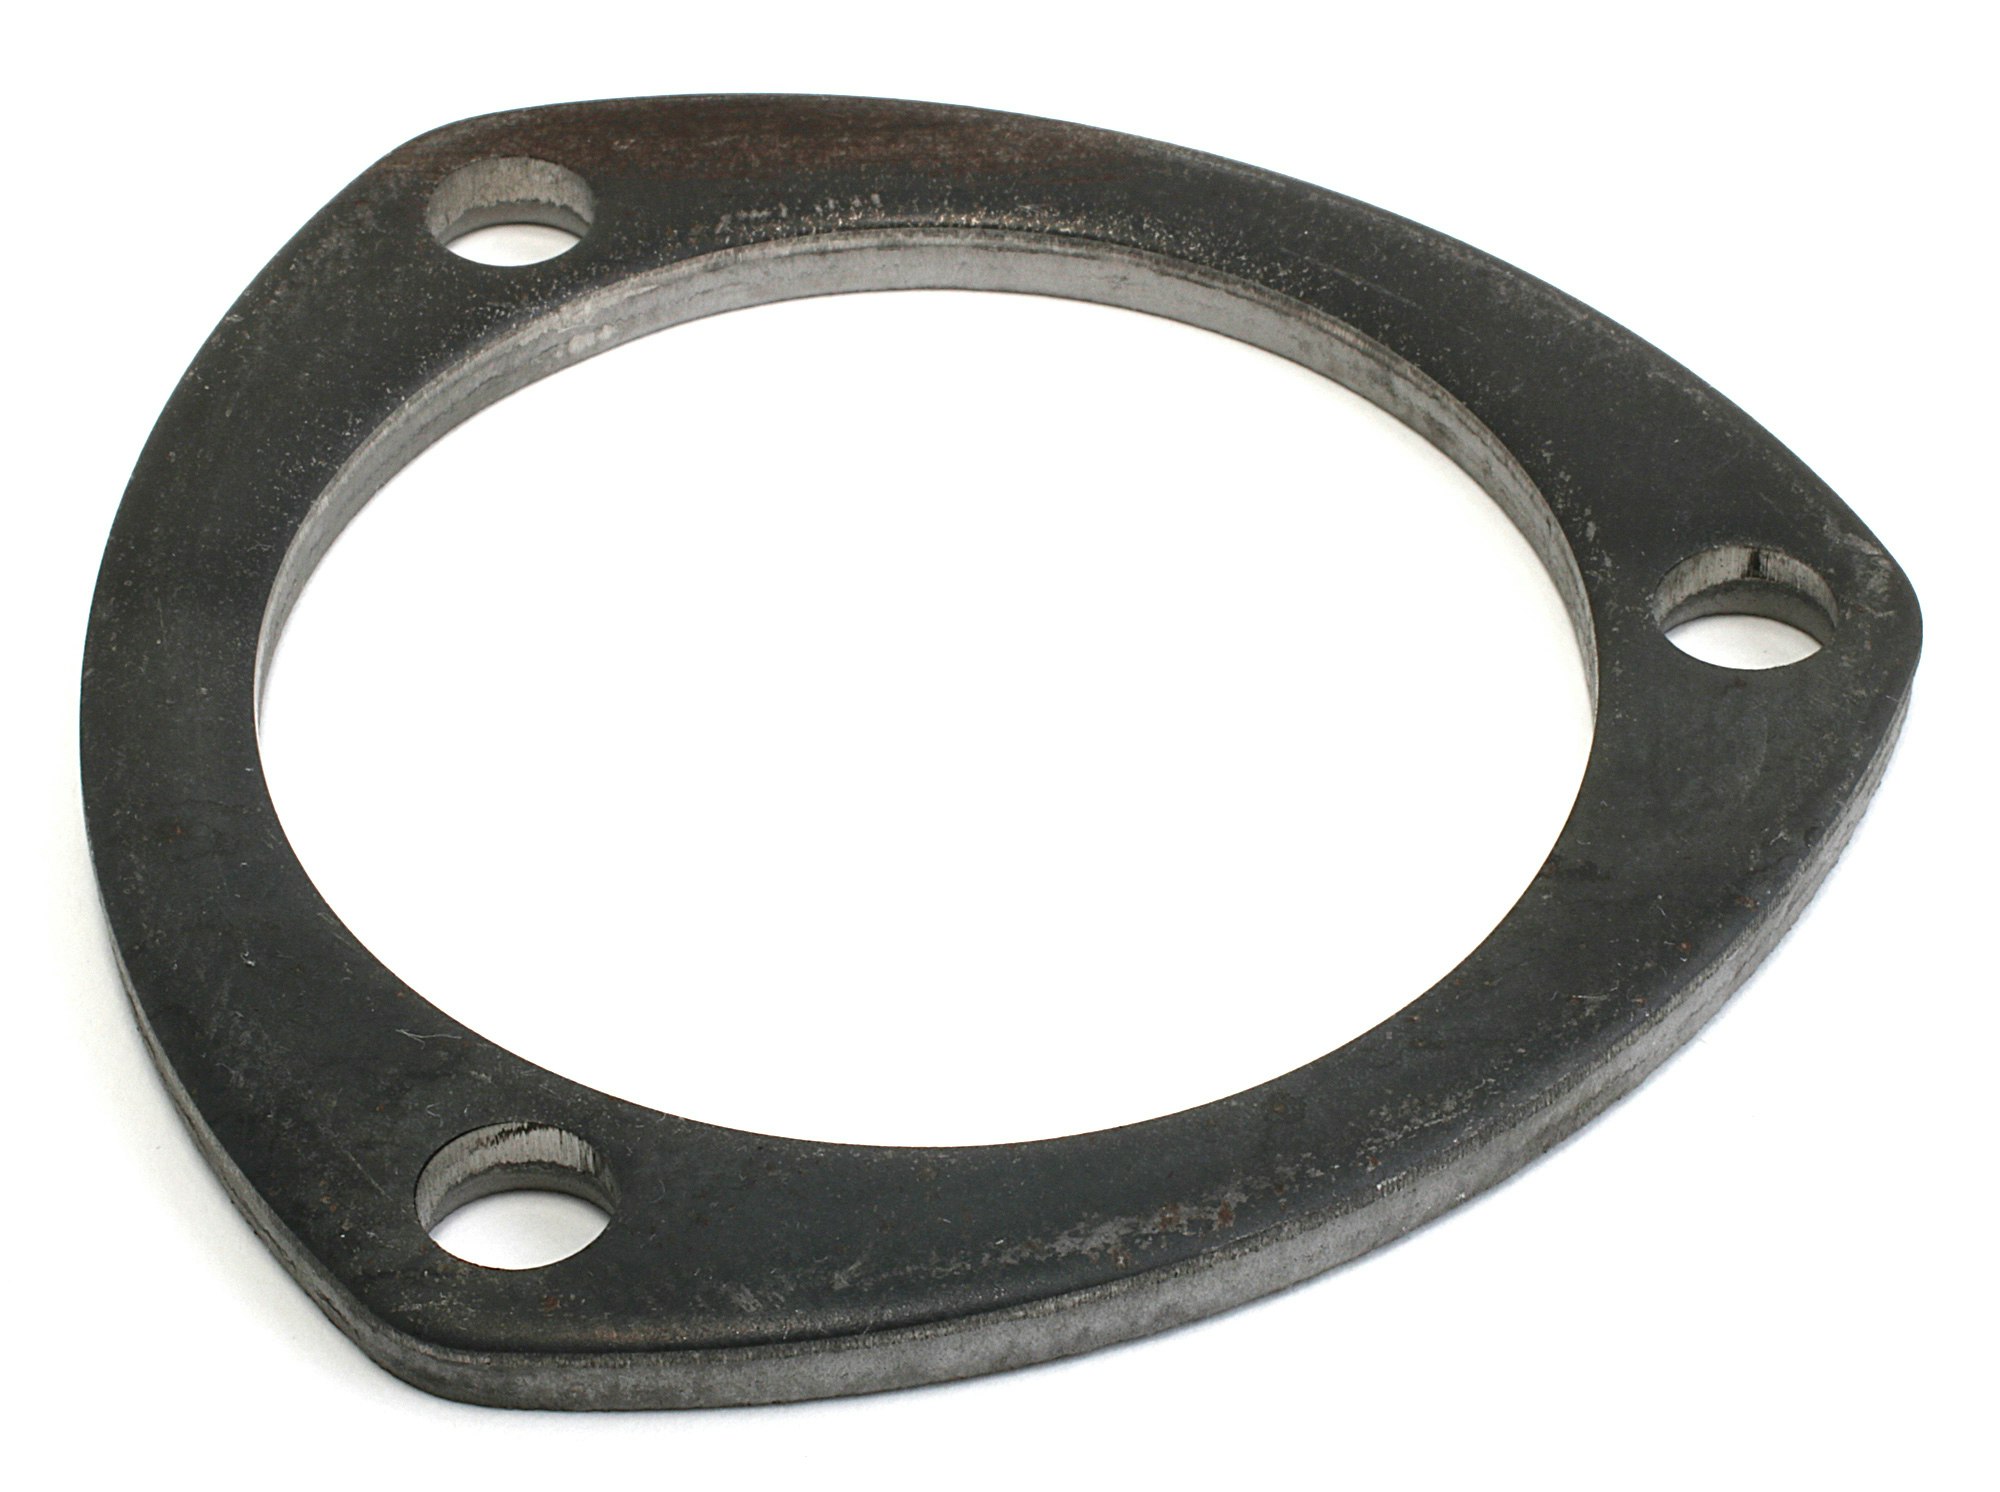 Moroso 80810 Low Profile Stainless Steel Band Clamp for Exhaust System 